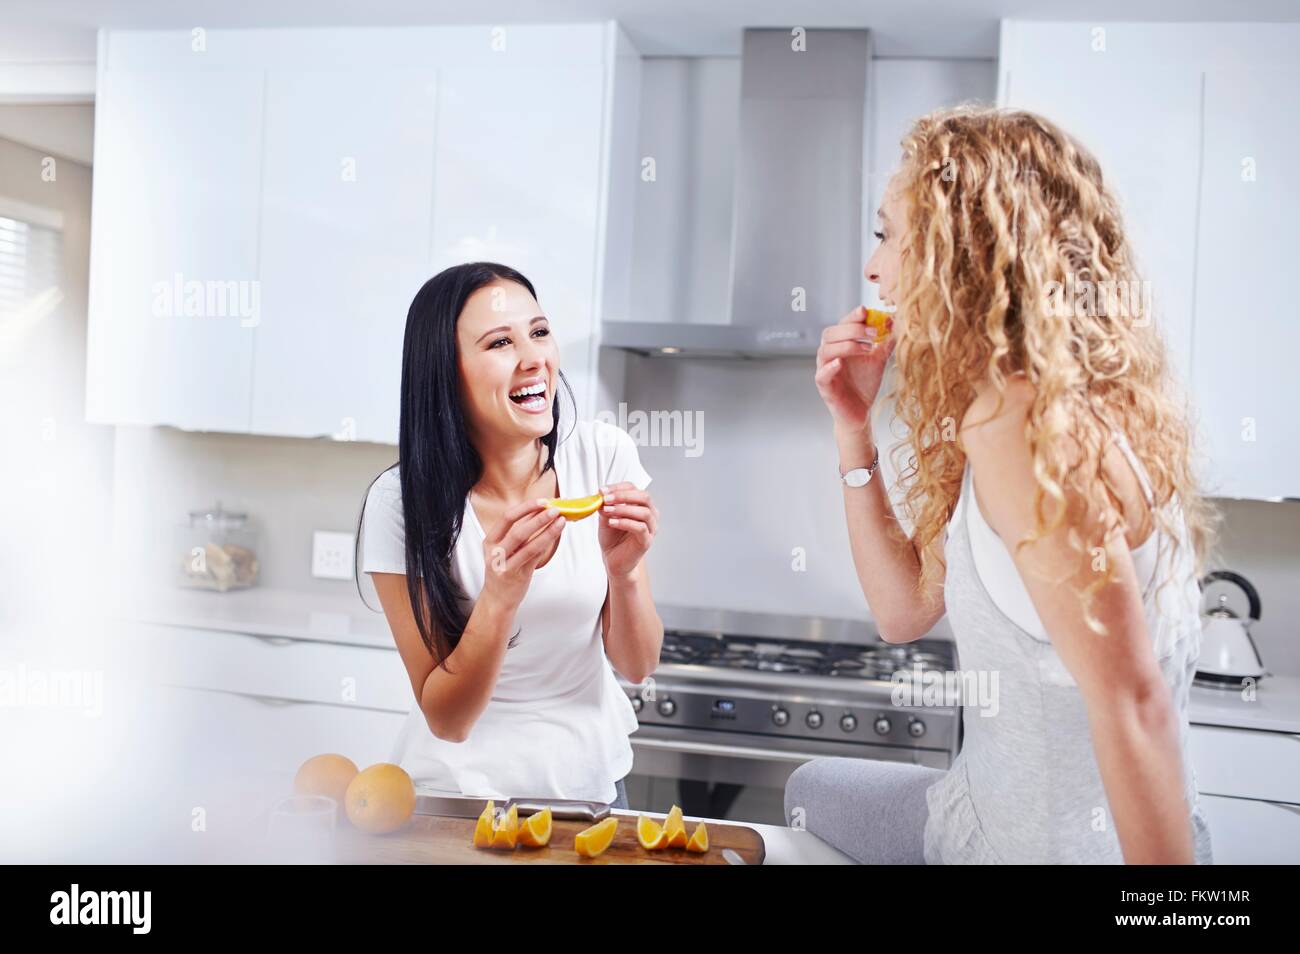 Two young female friends eating breakfast oranges at kitchen counter Stock Photo